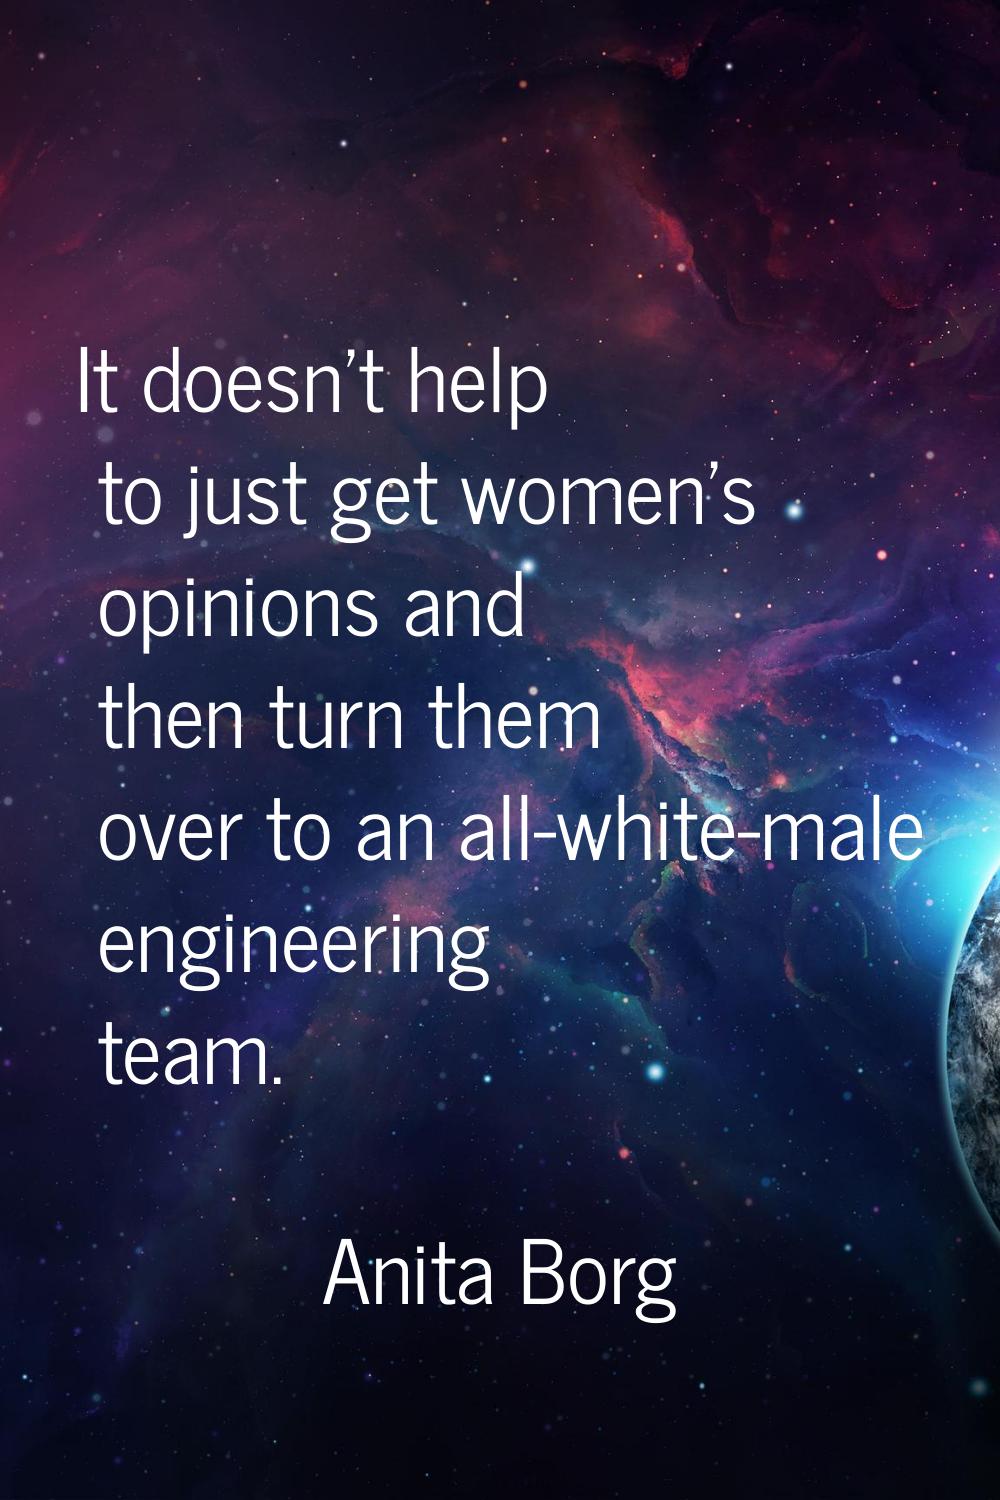 It doesn't help to just get women's opinions and then turn them over to an all-white-male engineeri